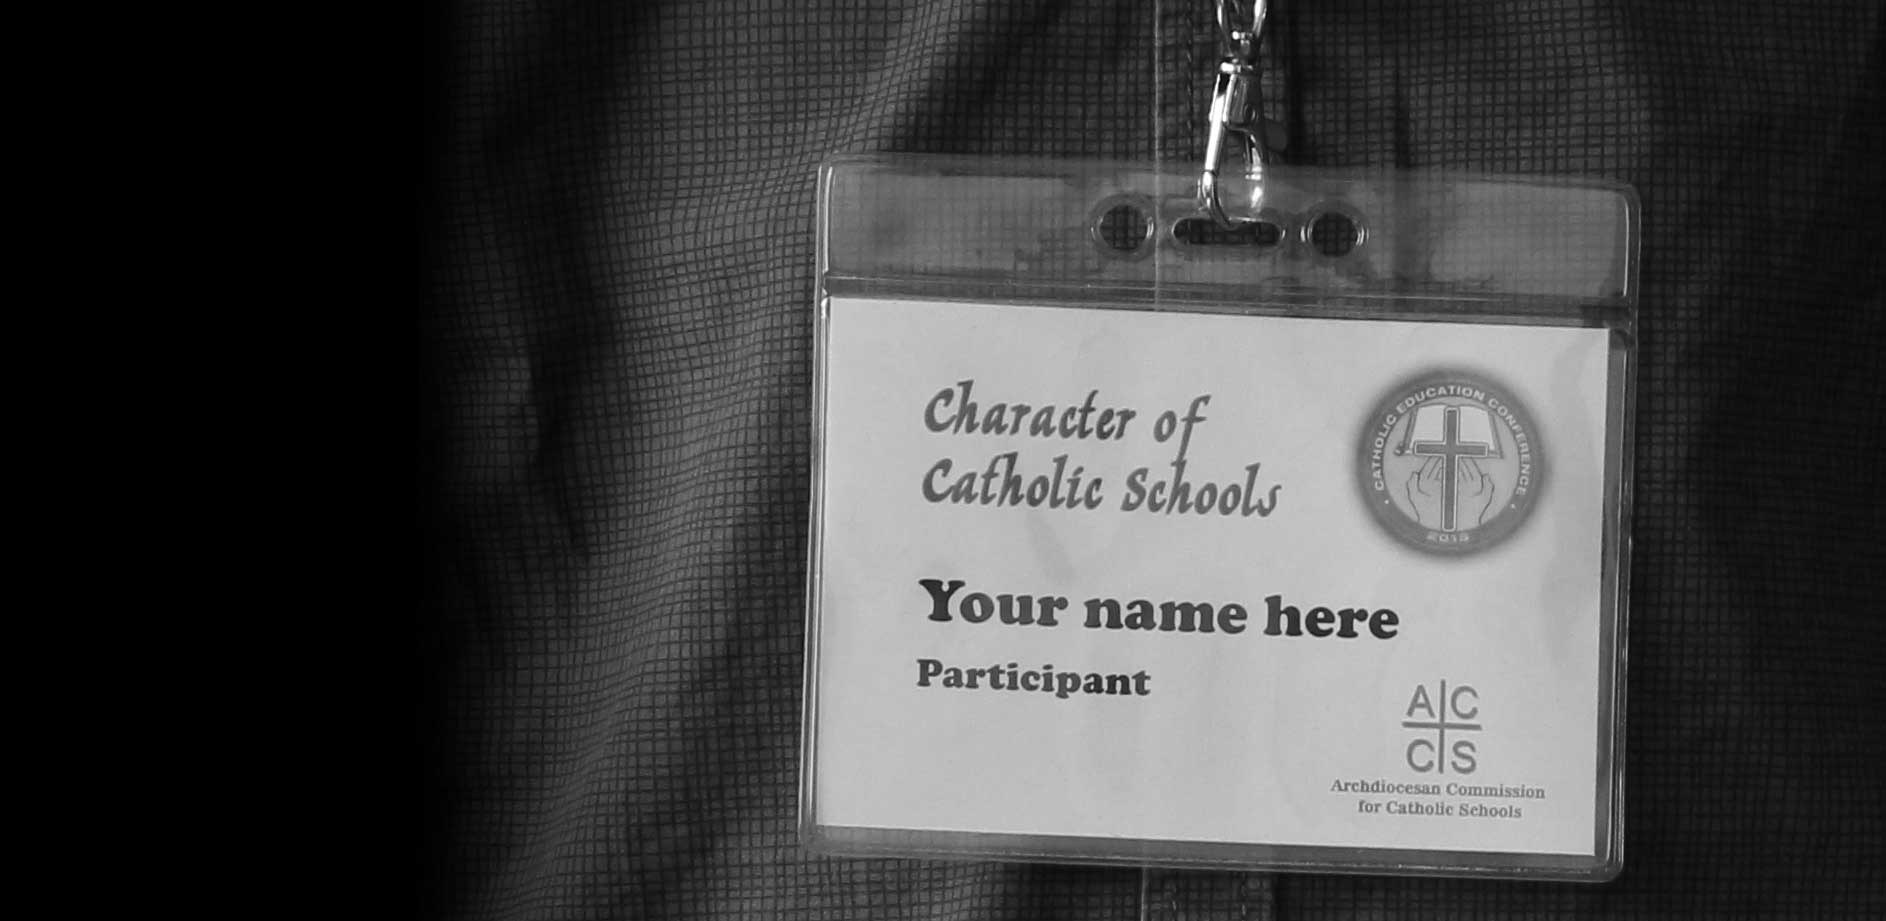 CEC2015 aims to increase understanding of the character of Catholic schools